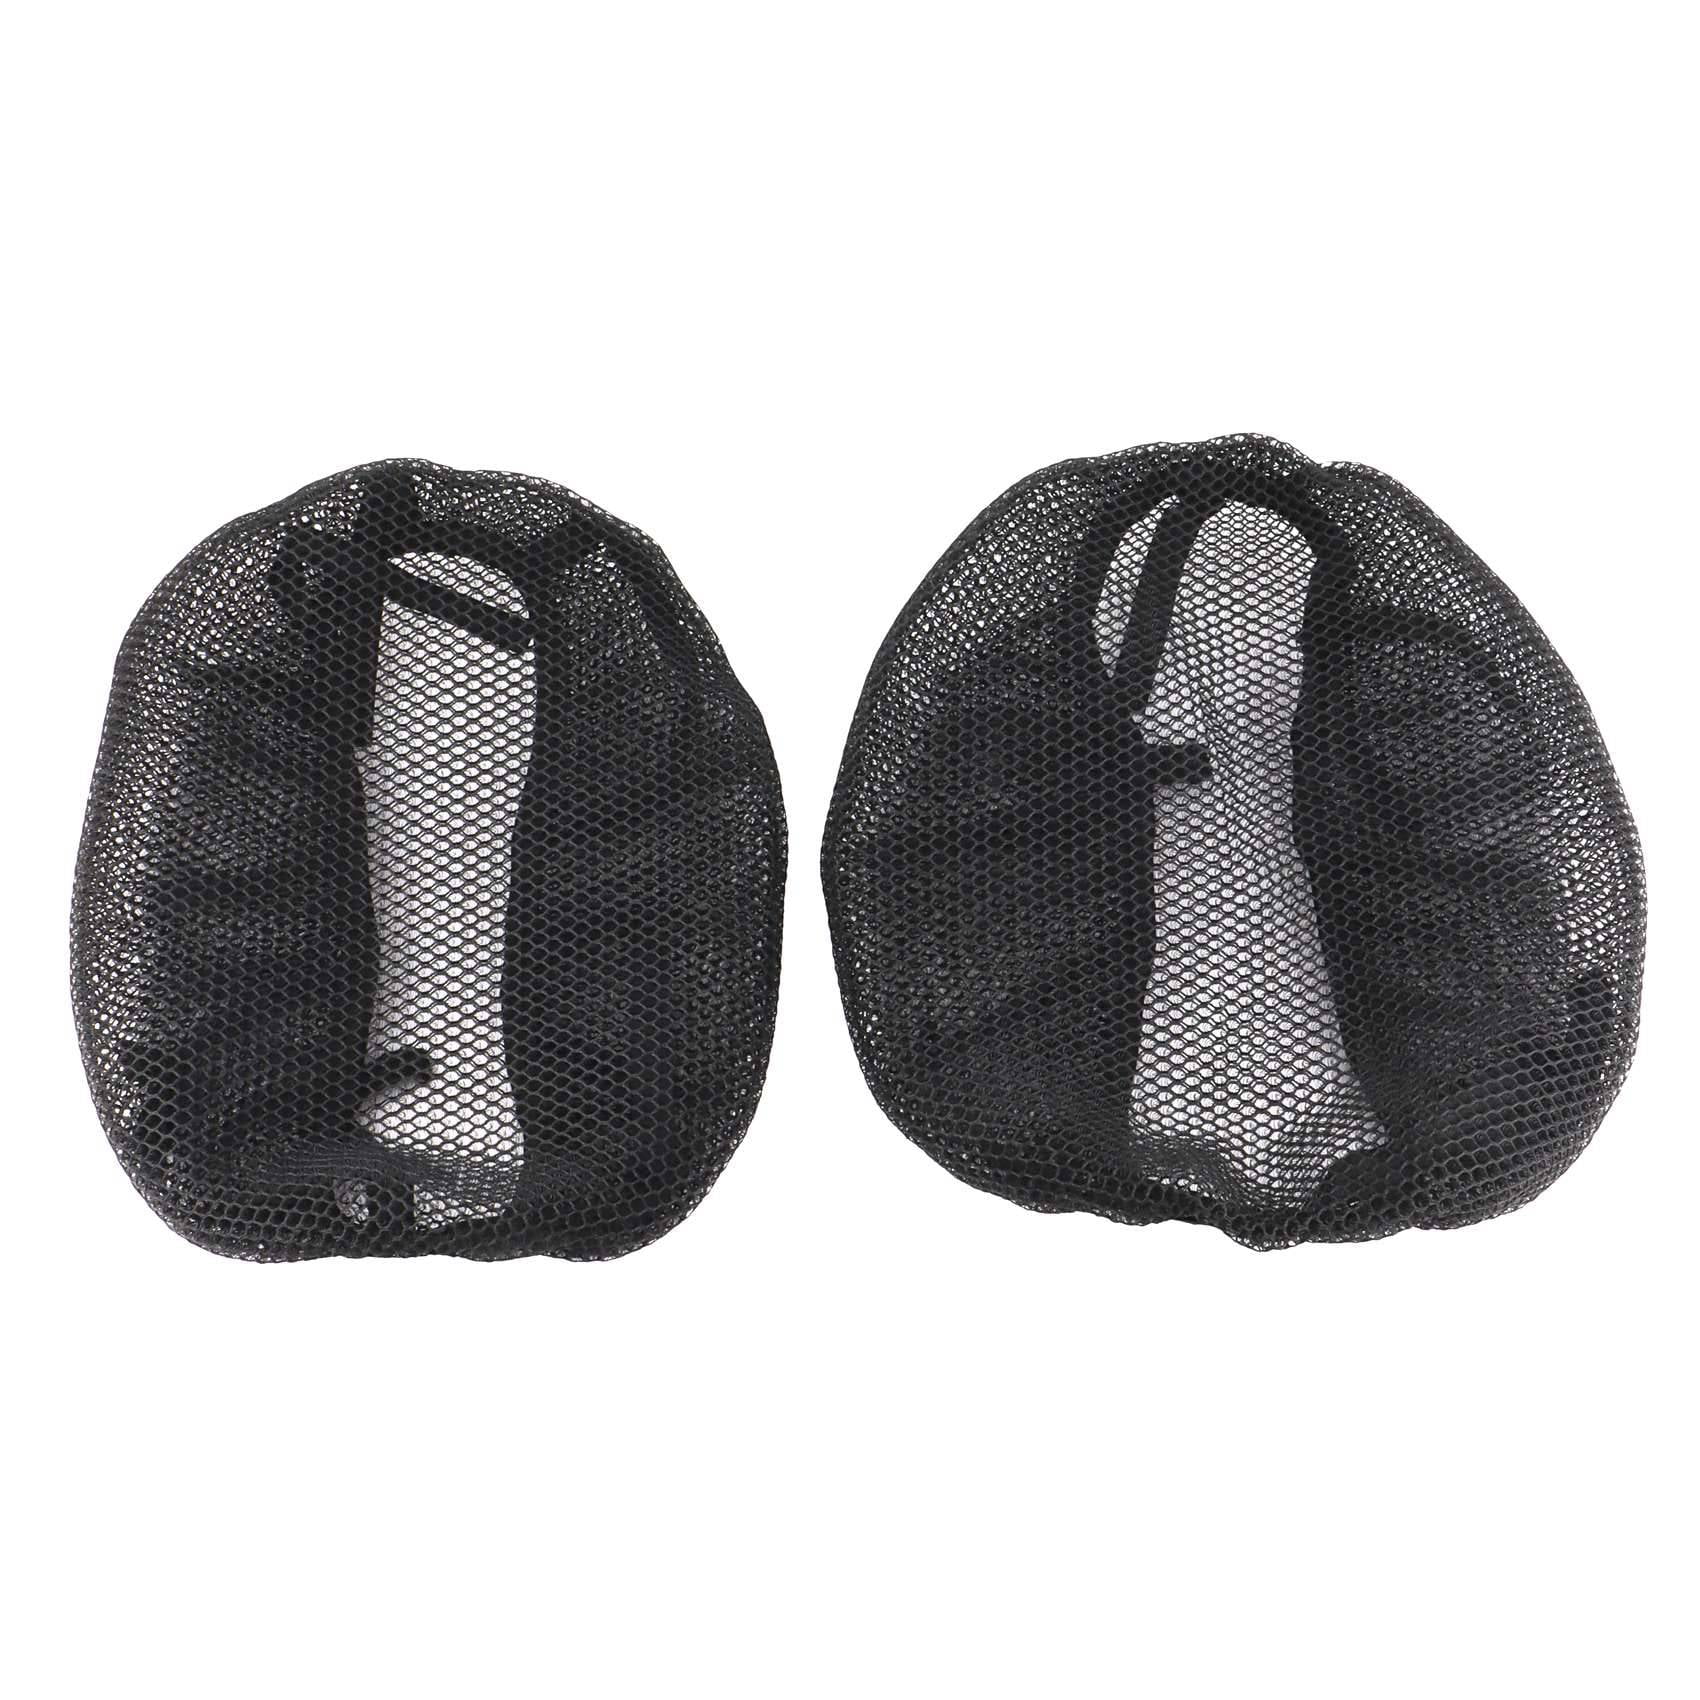 Polyester 3D Motorcycle Scooter Seat Cover Mesh Net Heat insulation Sleeve Black 